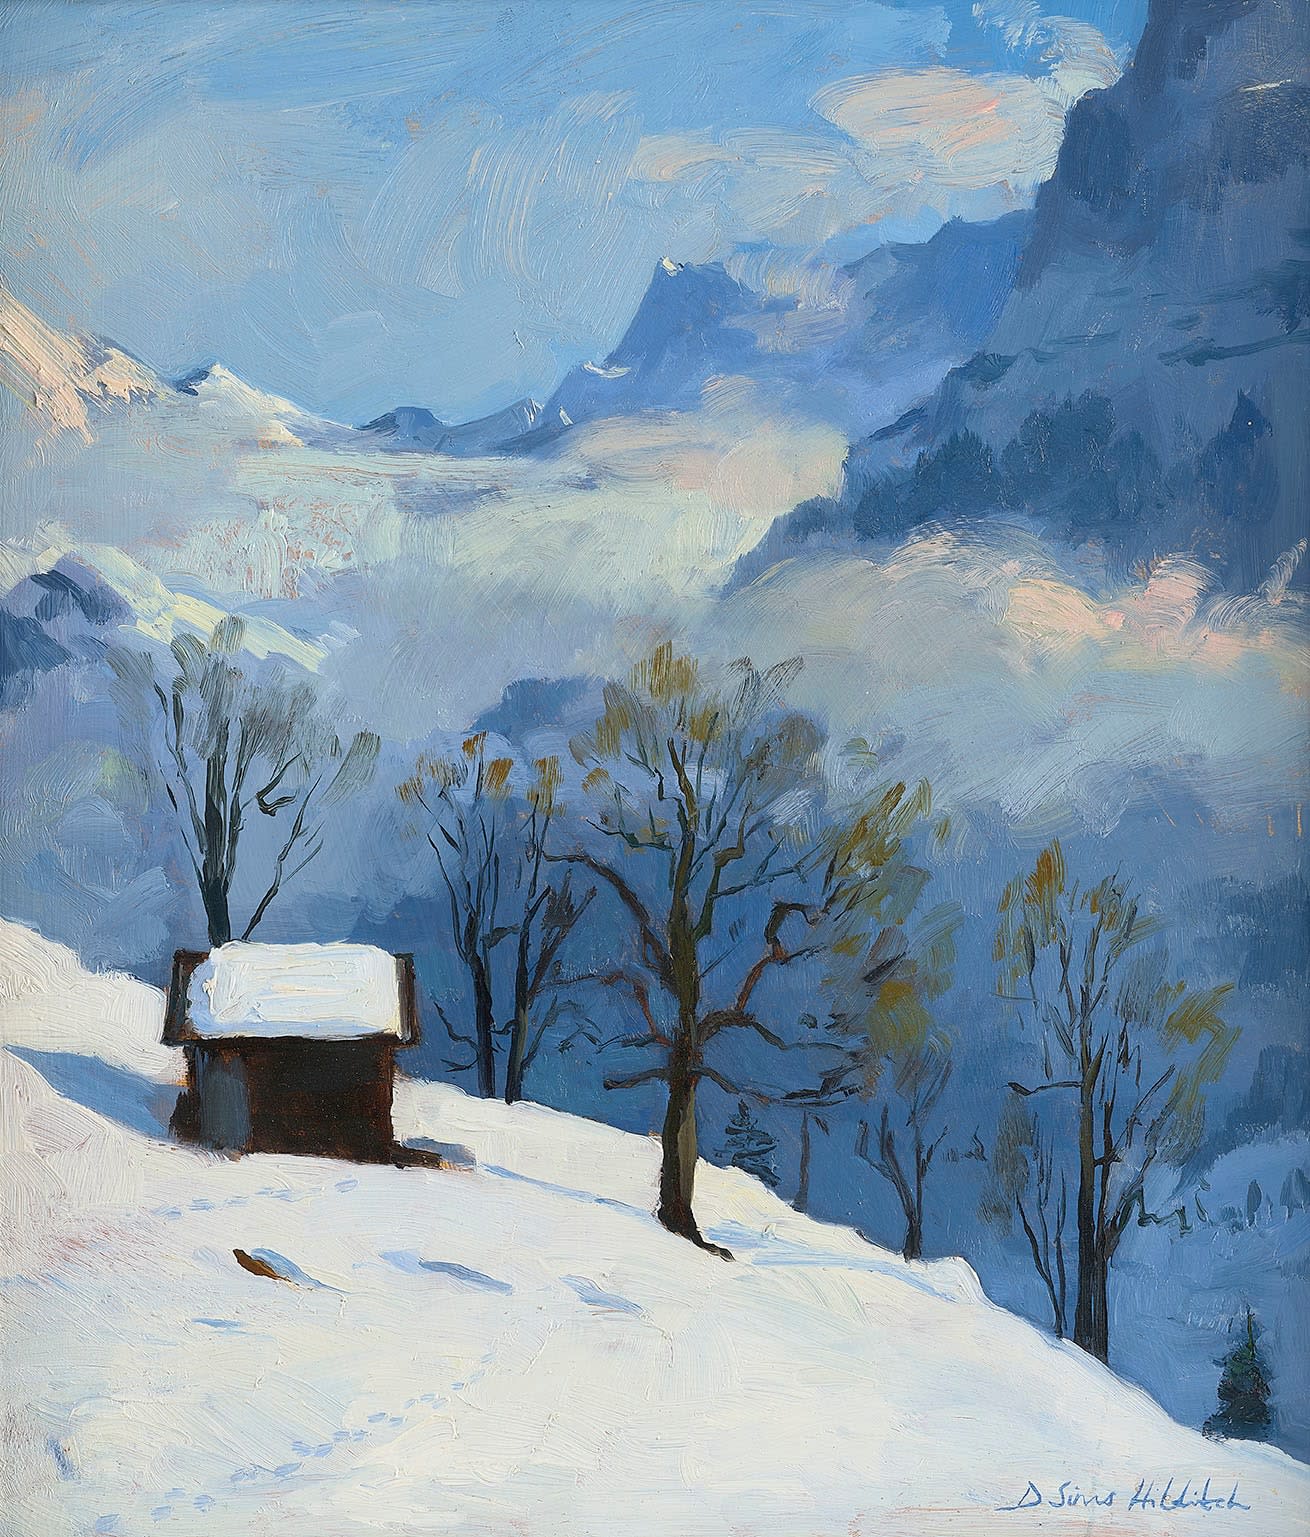 Daisy Sims Hilditch, Cloud in the Valley Towards the Glacier